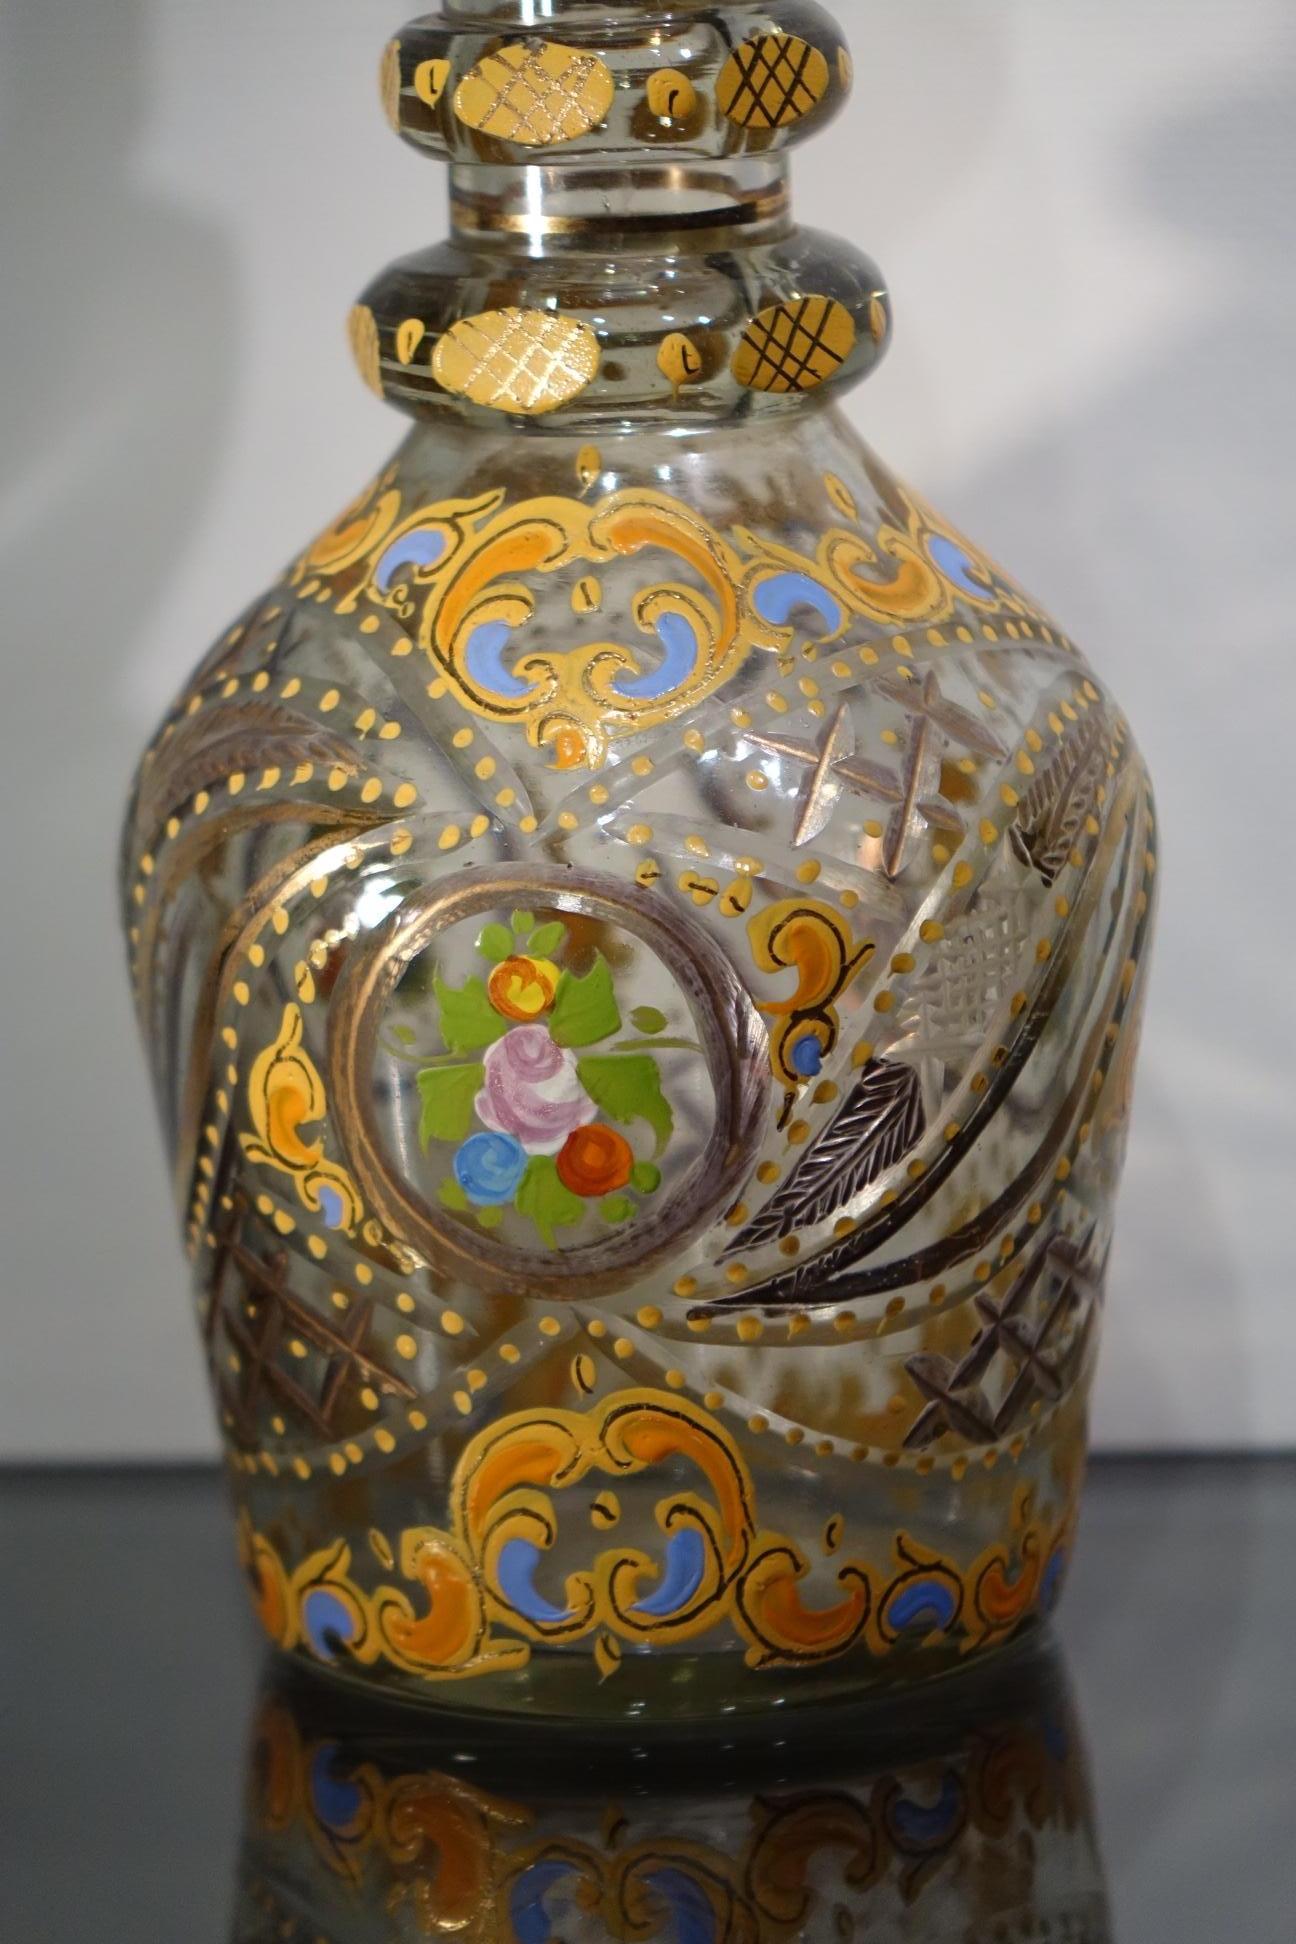 Cut-glass bottle made for the oriental market, in Bohemia, from the early 19th century.
Bottle and its conical cap in translucent glass, with polychrome decoration of roses and Baroque motifs.
Very good condition.